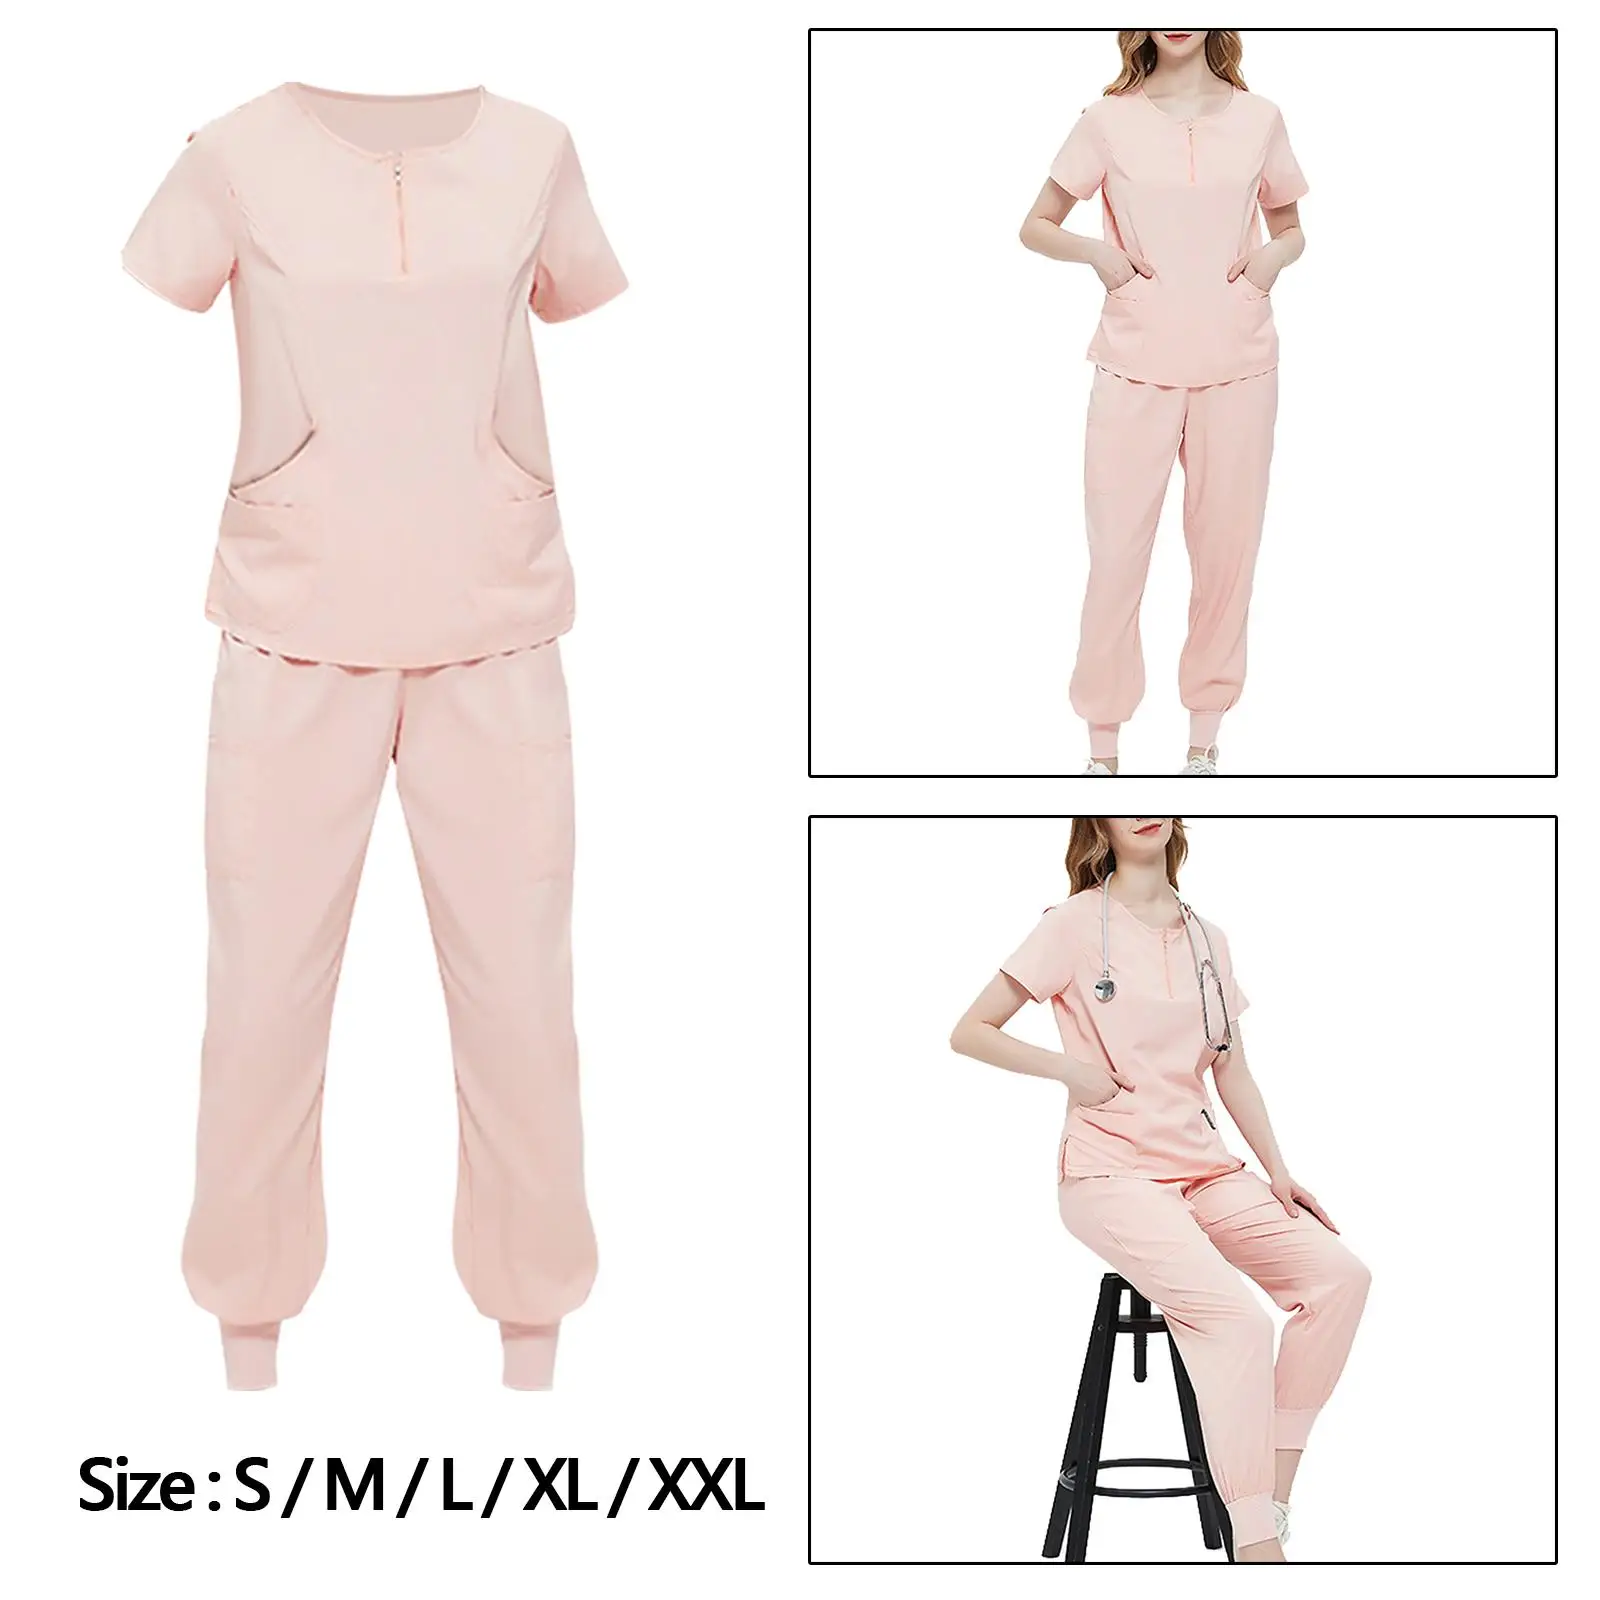 Uniforms Scrub Set Nurse Top and Pants for Healthcare Veterinary Cosmetology